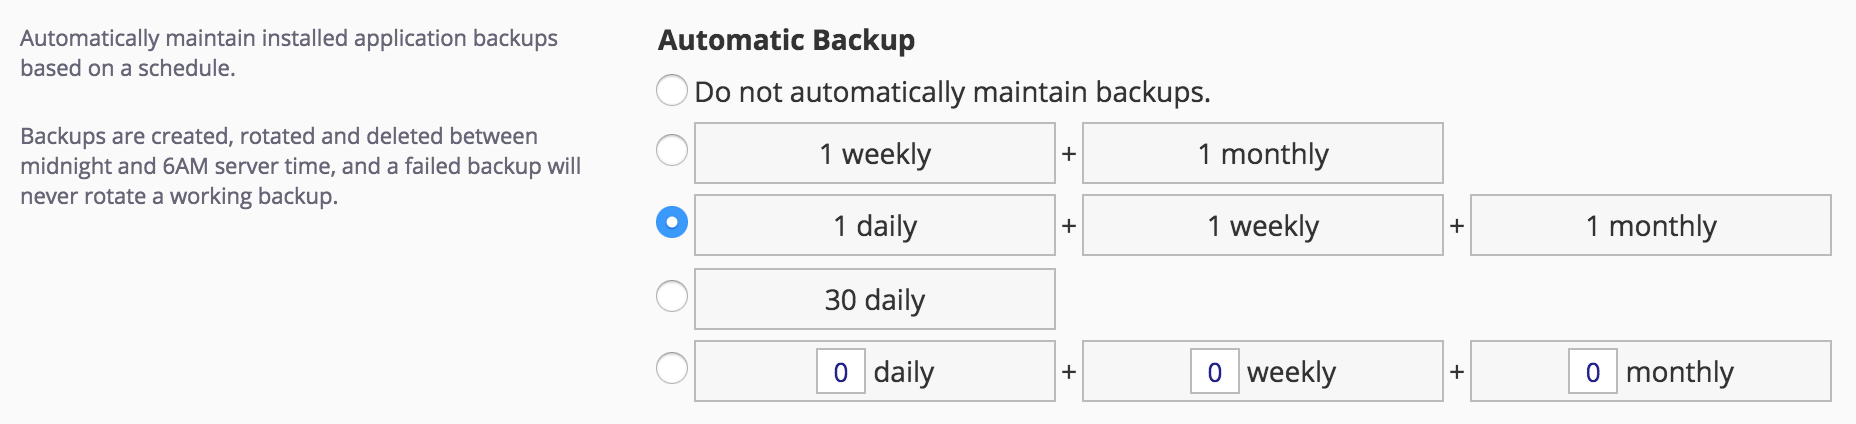 Automated Backup Intervals